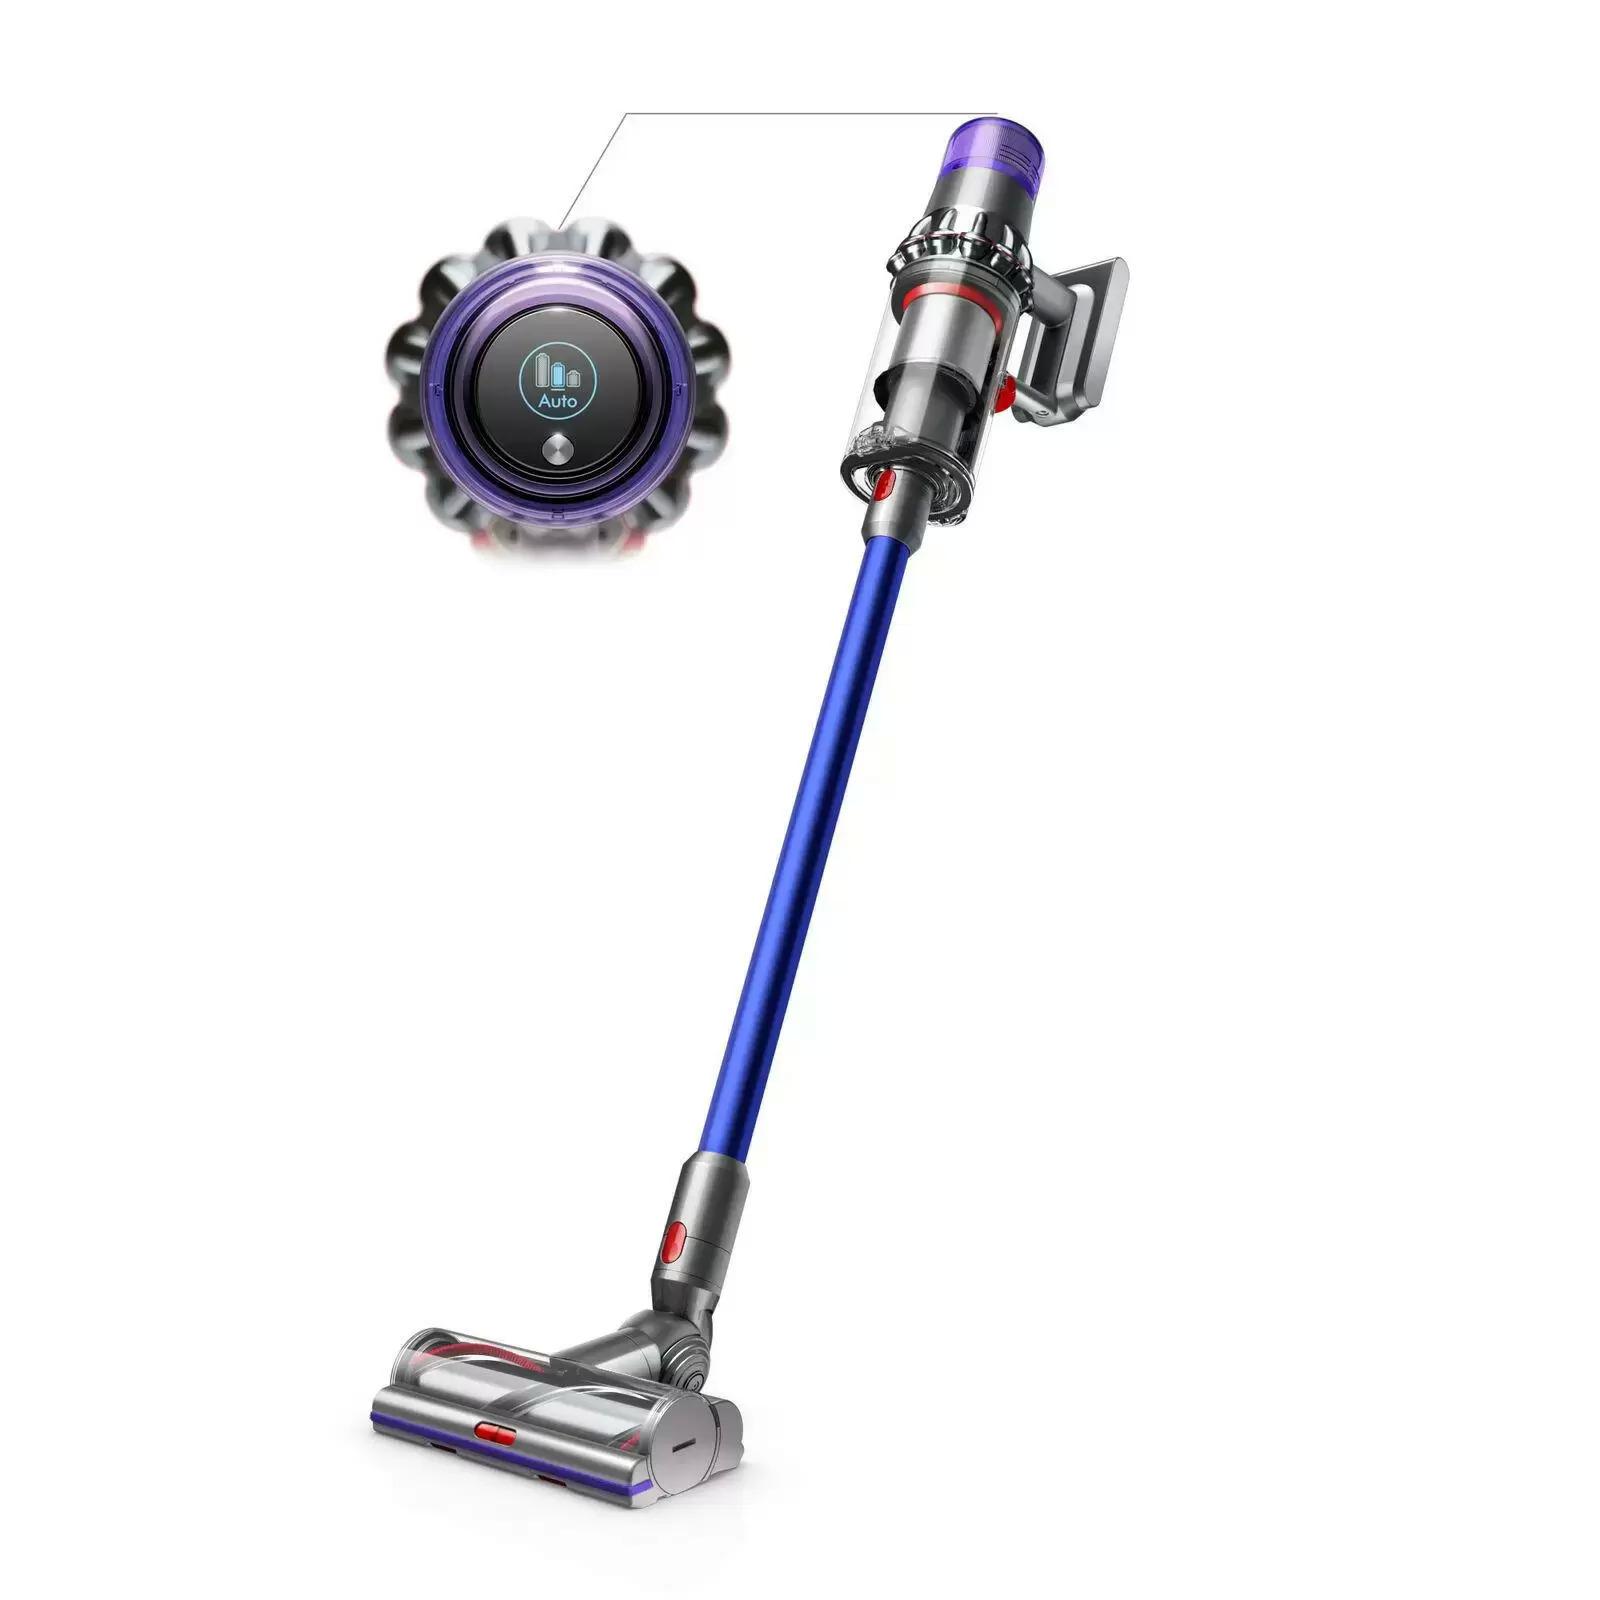 Dyson V11 Cordless Stick Vacuum with 3 Tools for $279.98 Shipped